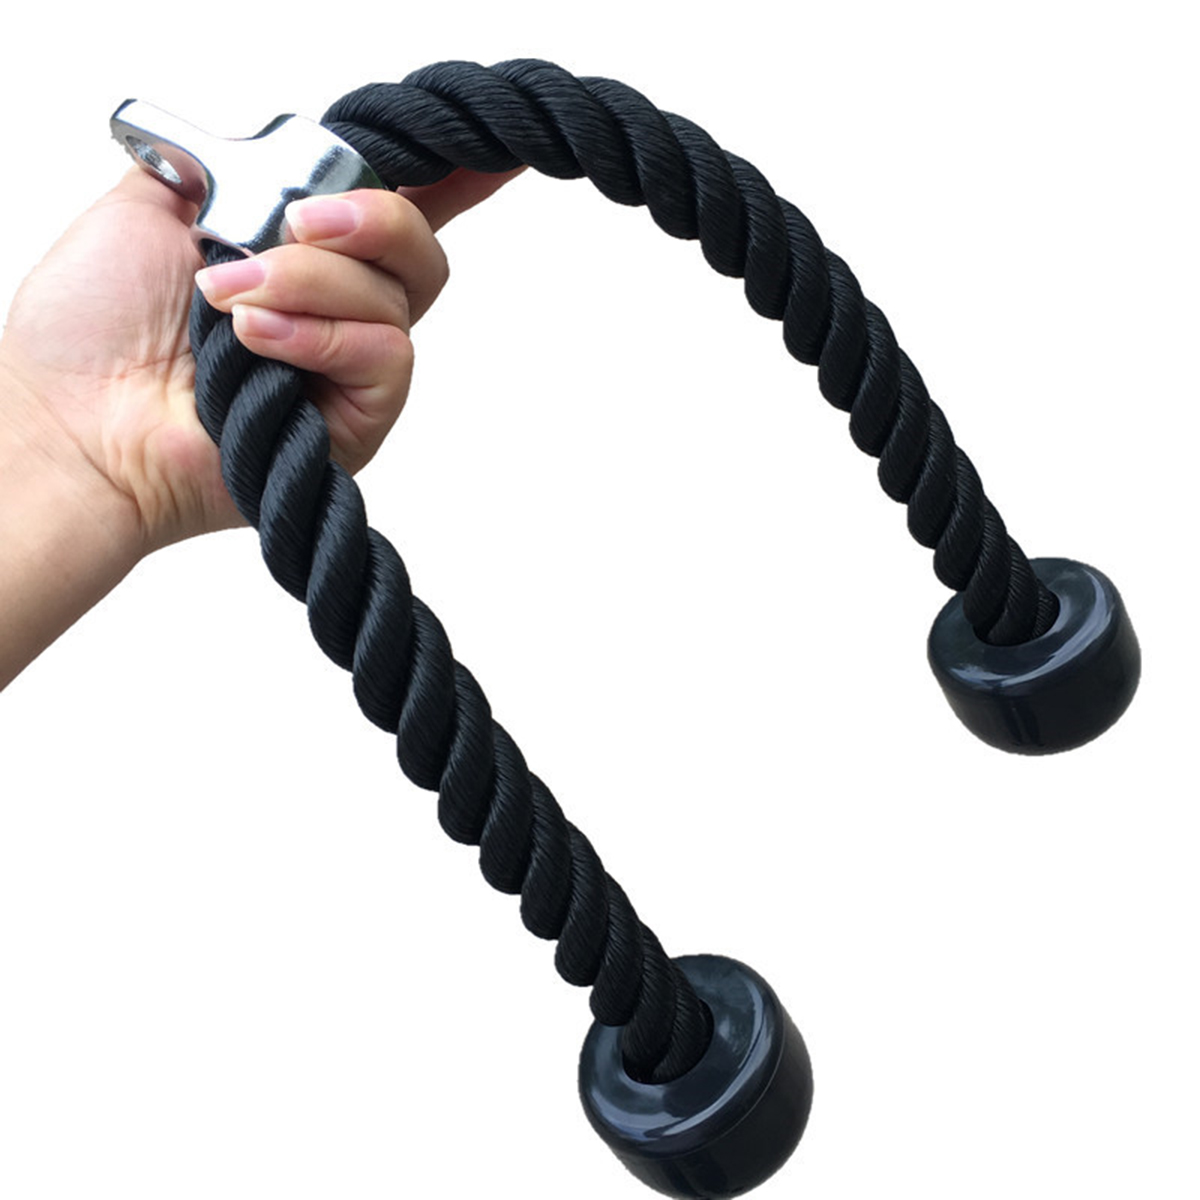 7PCSSET-Tricep-Bicep-Pull-Rope-Cable-Muscle-Strength-Training-Attachment-Home-Gym-Exercise-1851395-10